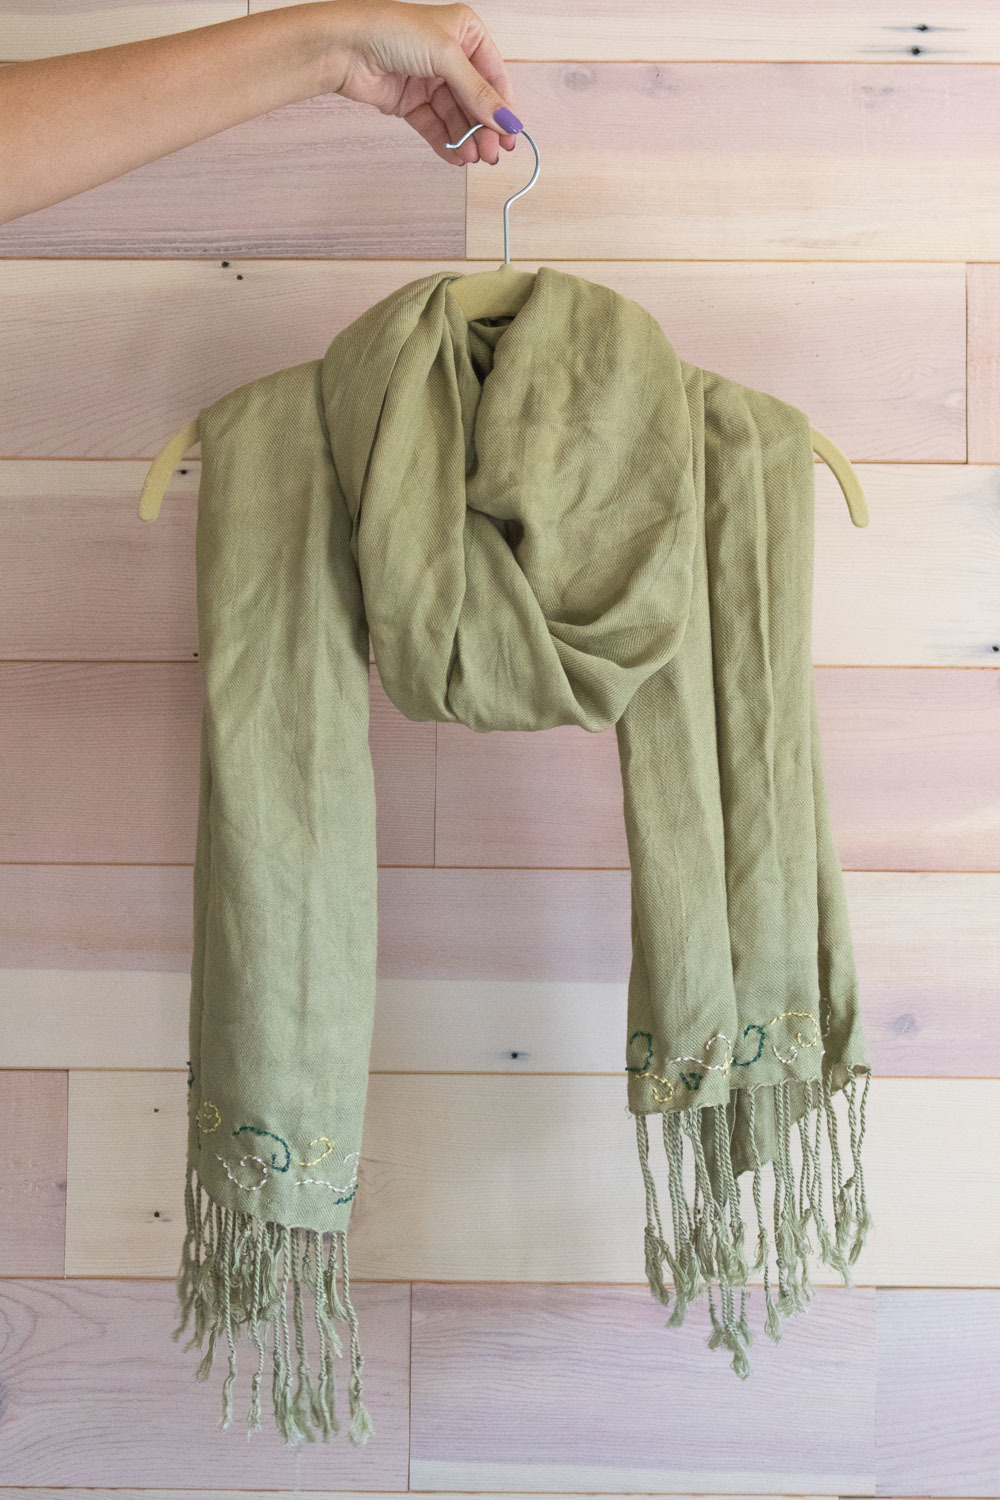 A green scarf on a hanger